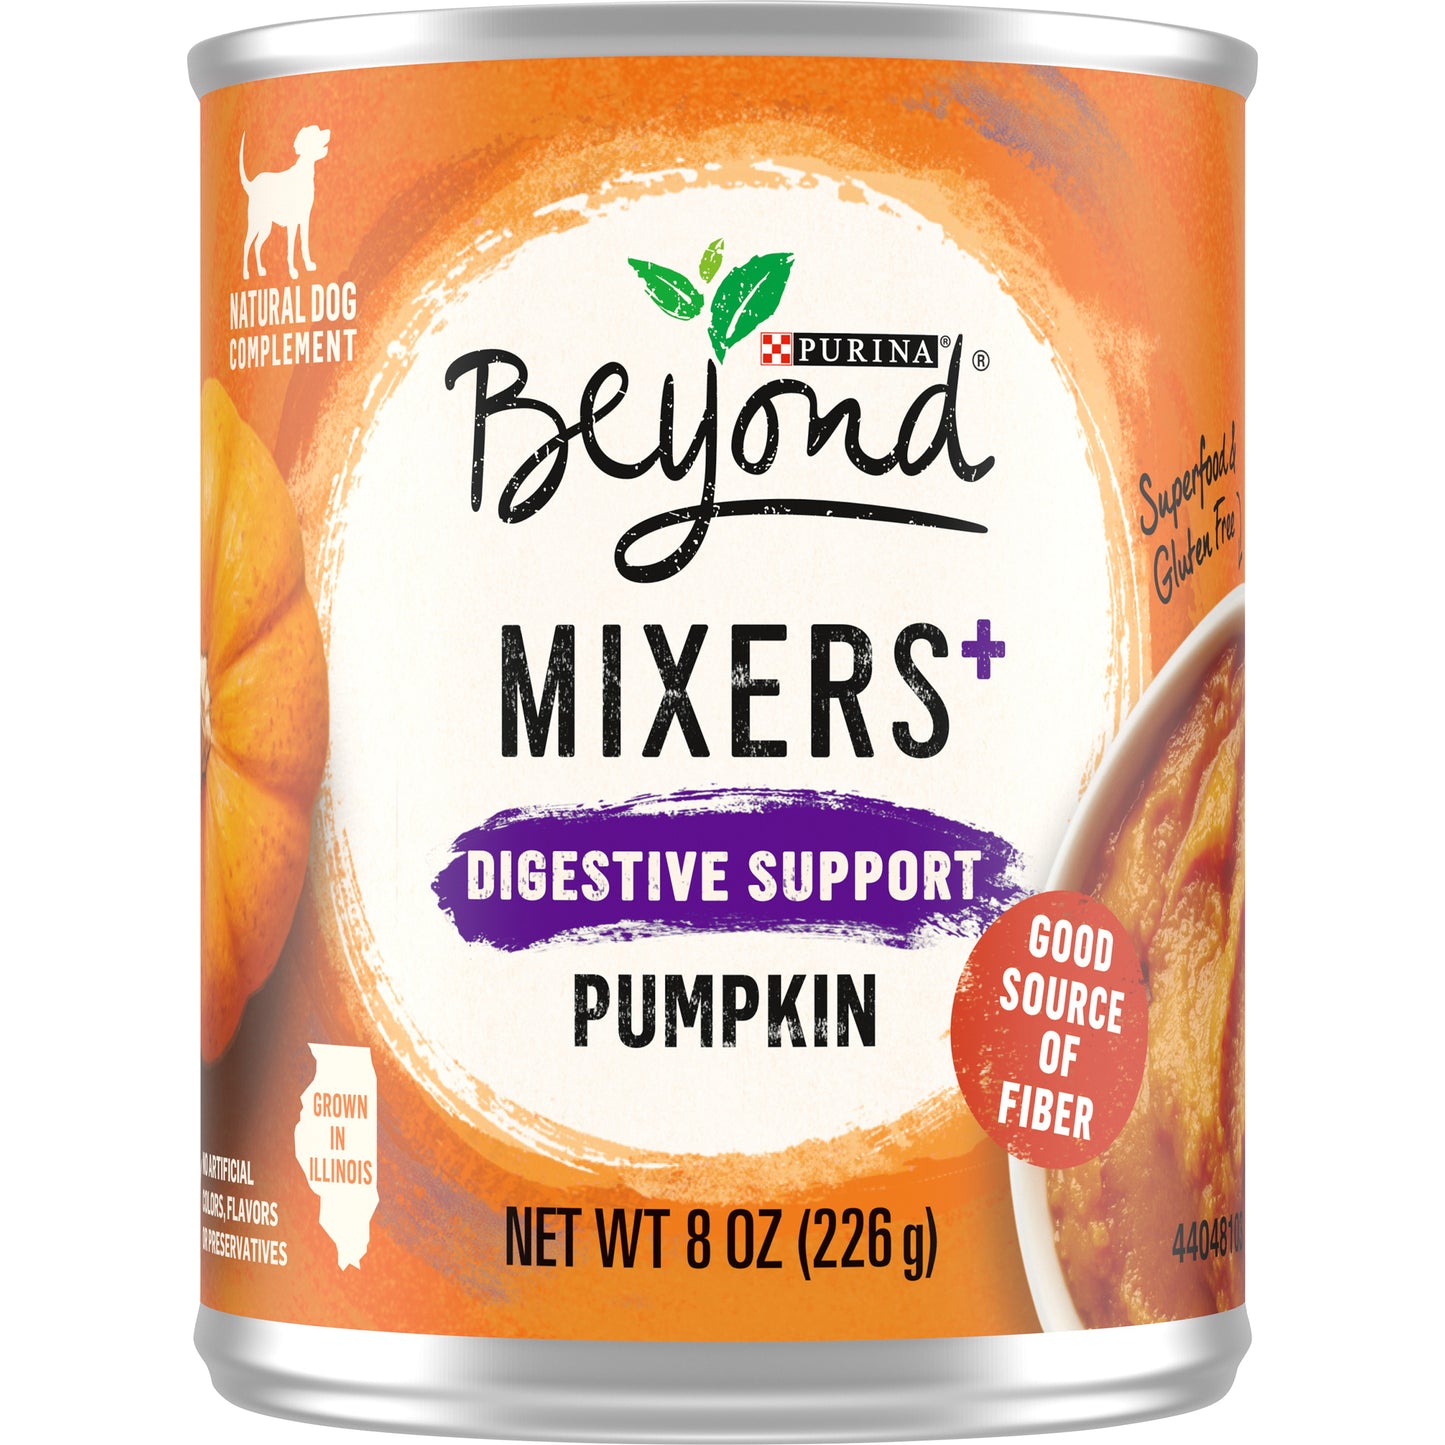 (12 Pack) Purina Beyond Natural, Grain Free, Limited Ingredient Dog Food Complement, Mixers+ Digestive Support Pumpkin, 8 oz. Cans